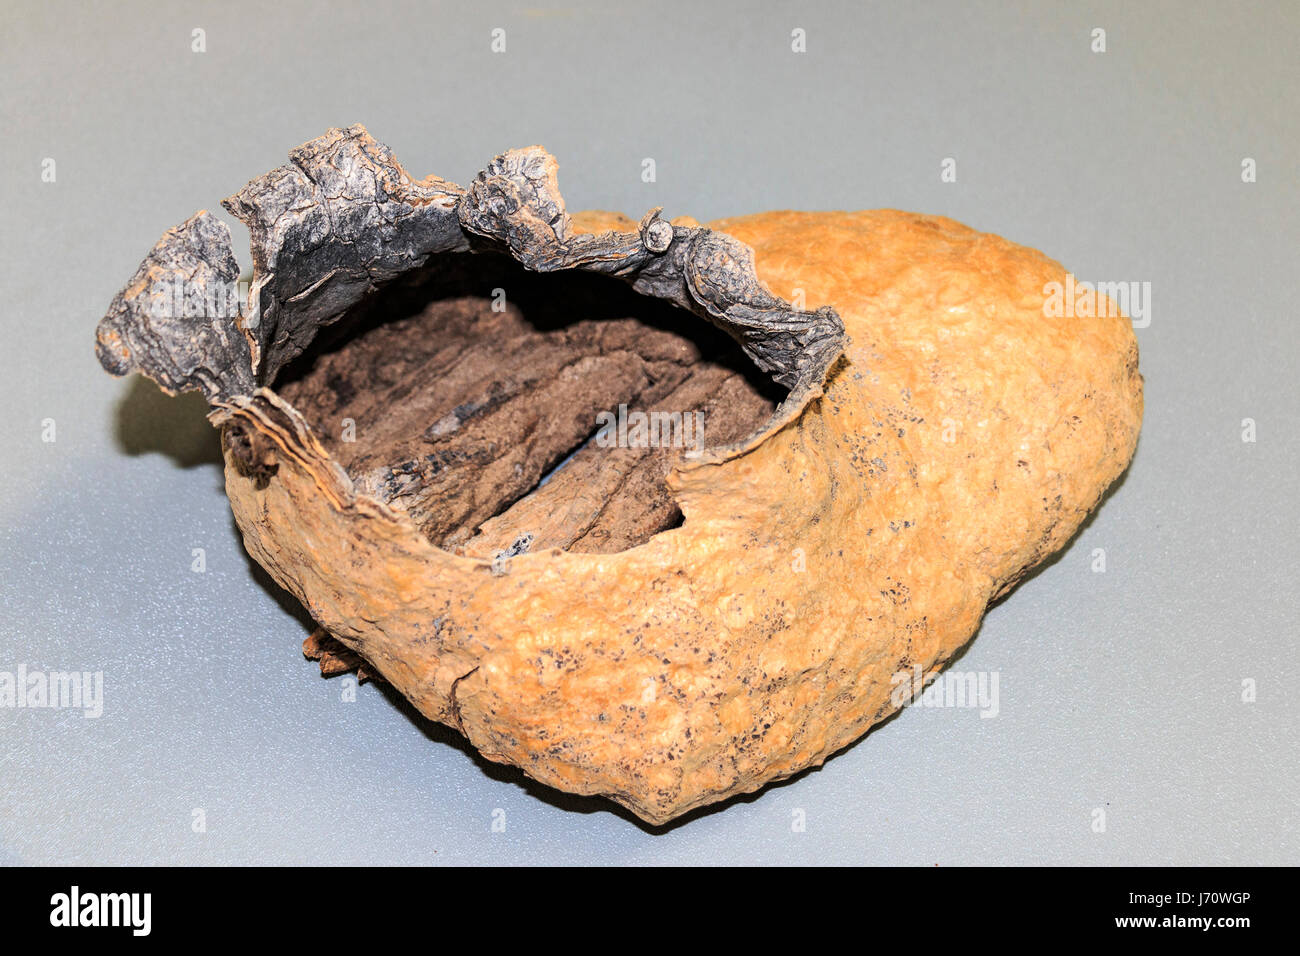 A saguaro 'boot,' formed when a bird pecks out a hole in a saguaro cactus, forming a hardened shell that is then used as a nest. Several kinds of bird Stock Photo